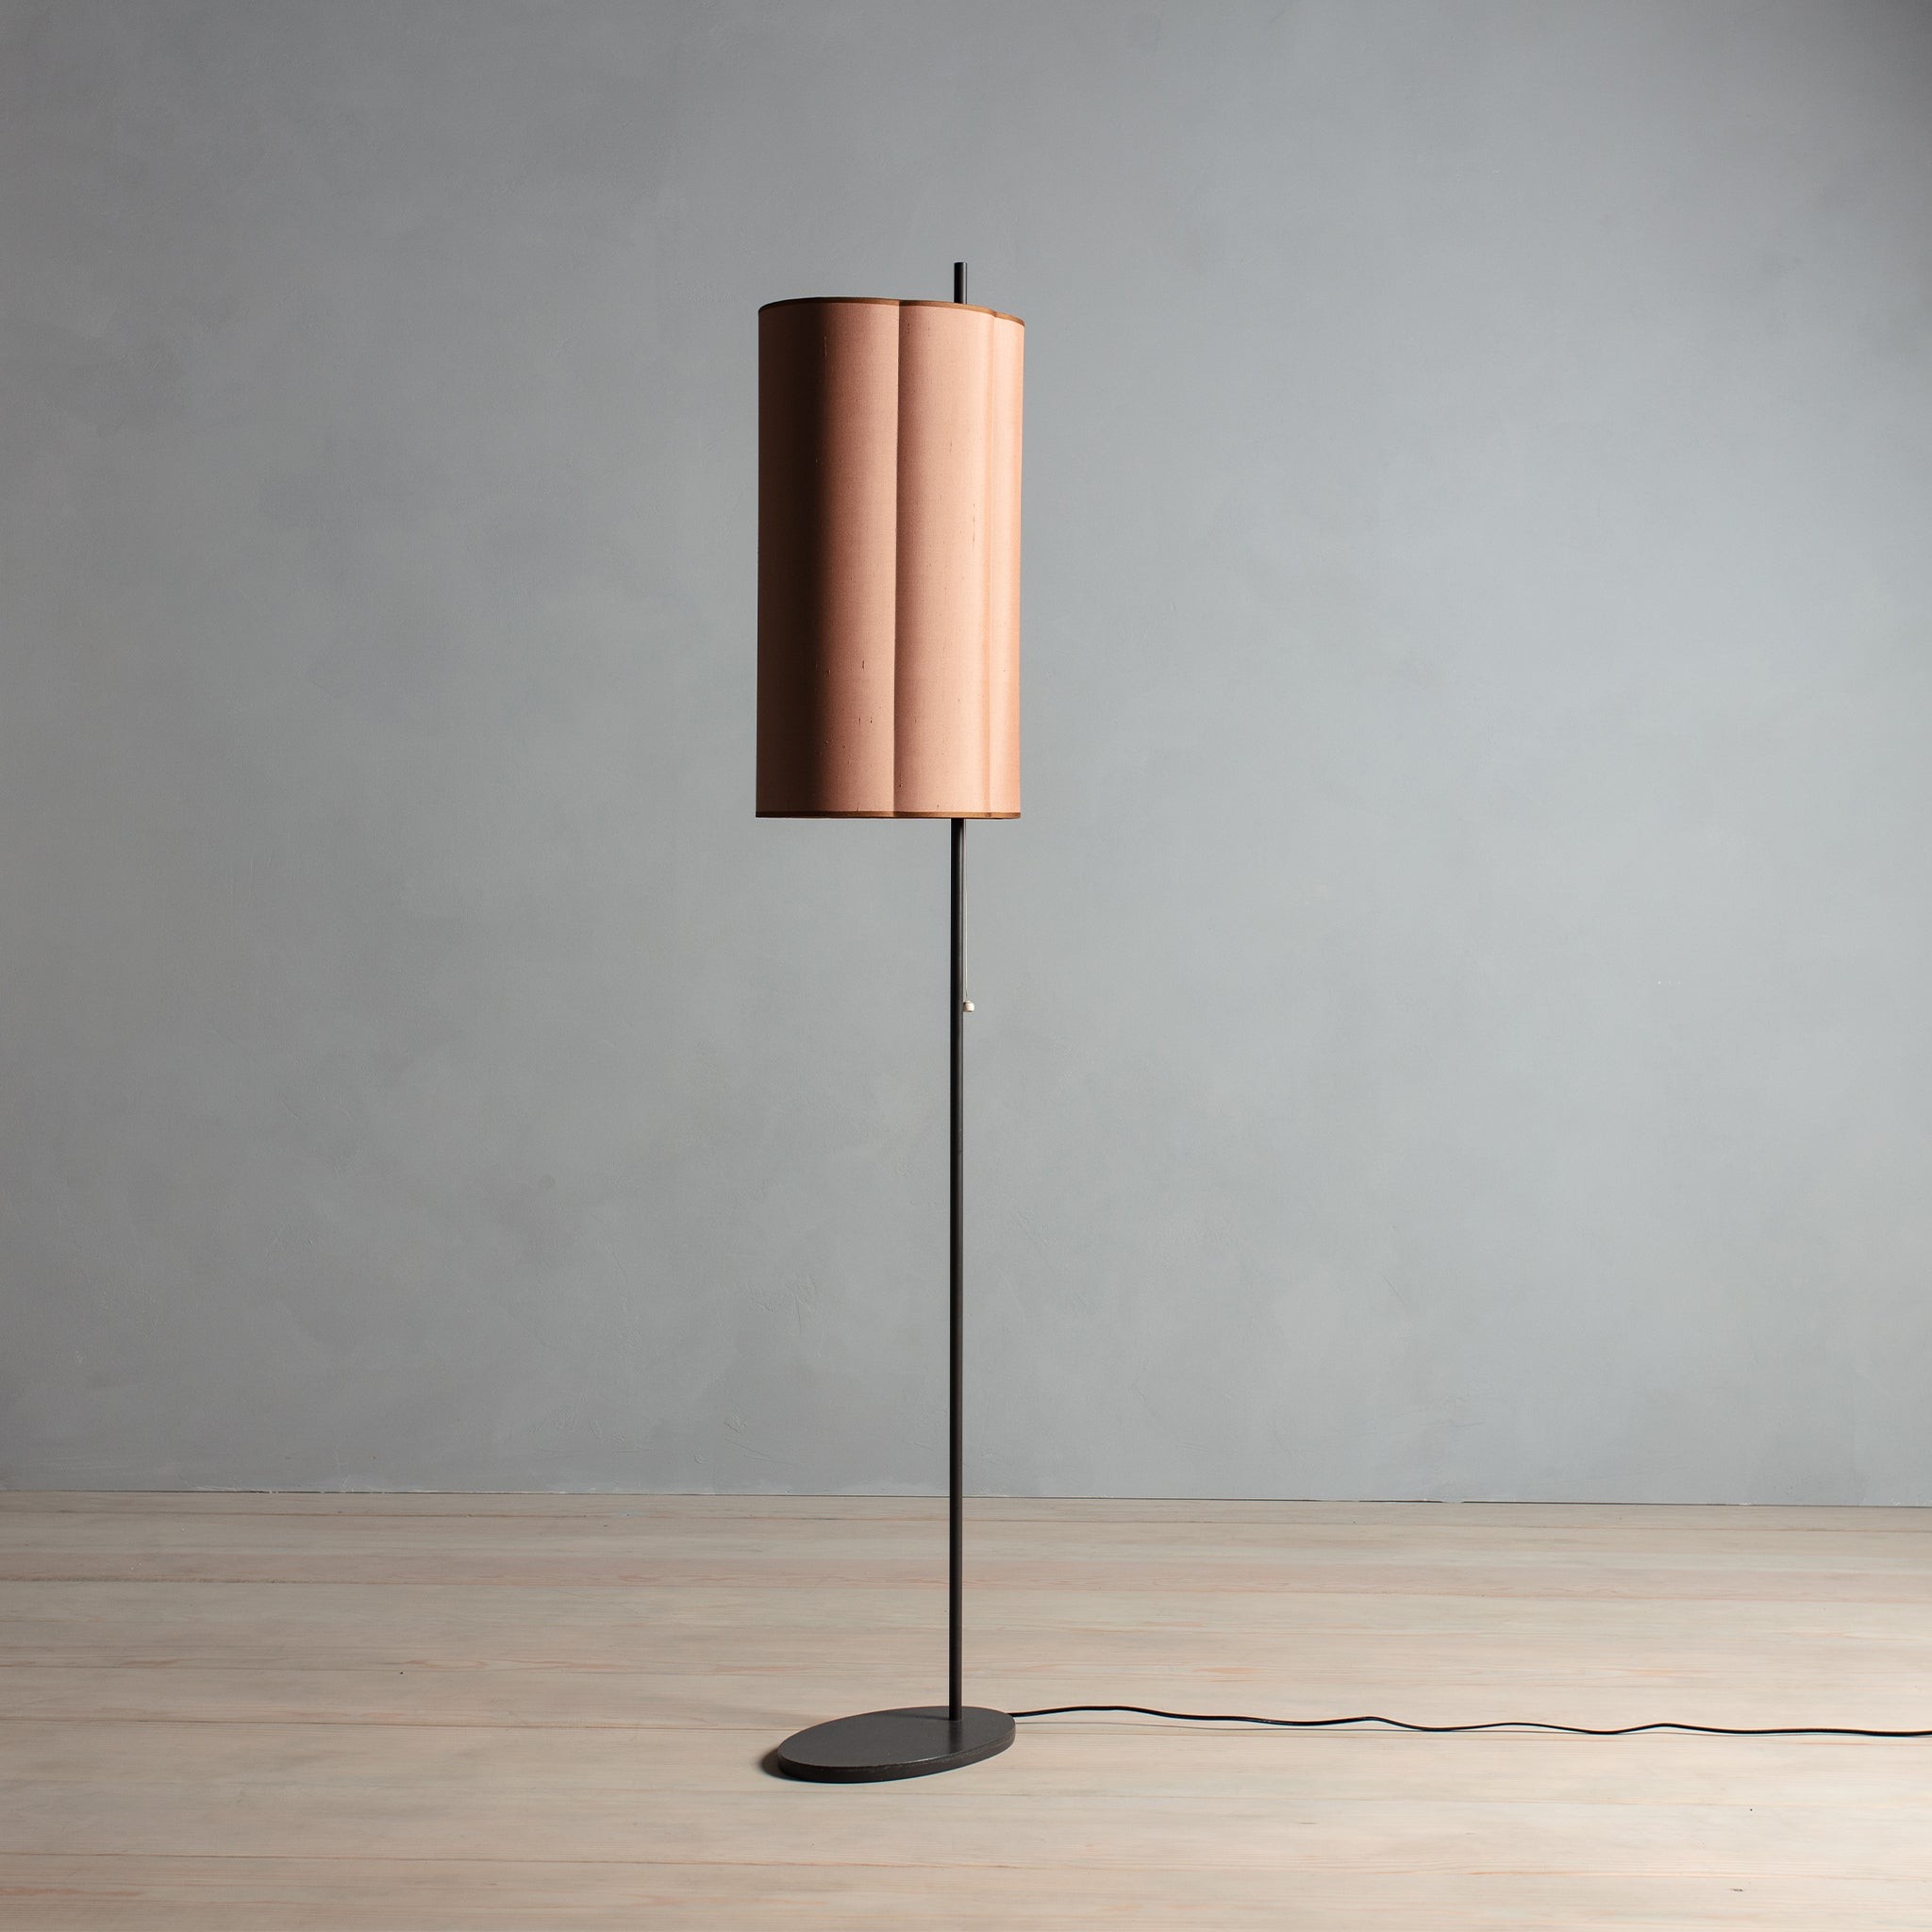 The image of an 'AJ Royal' floor lamp by Arne Jacobsen for Louis Poulsen product